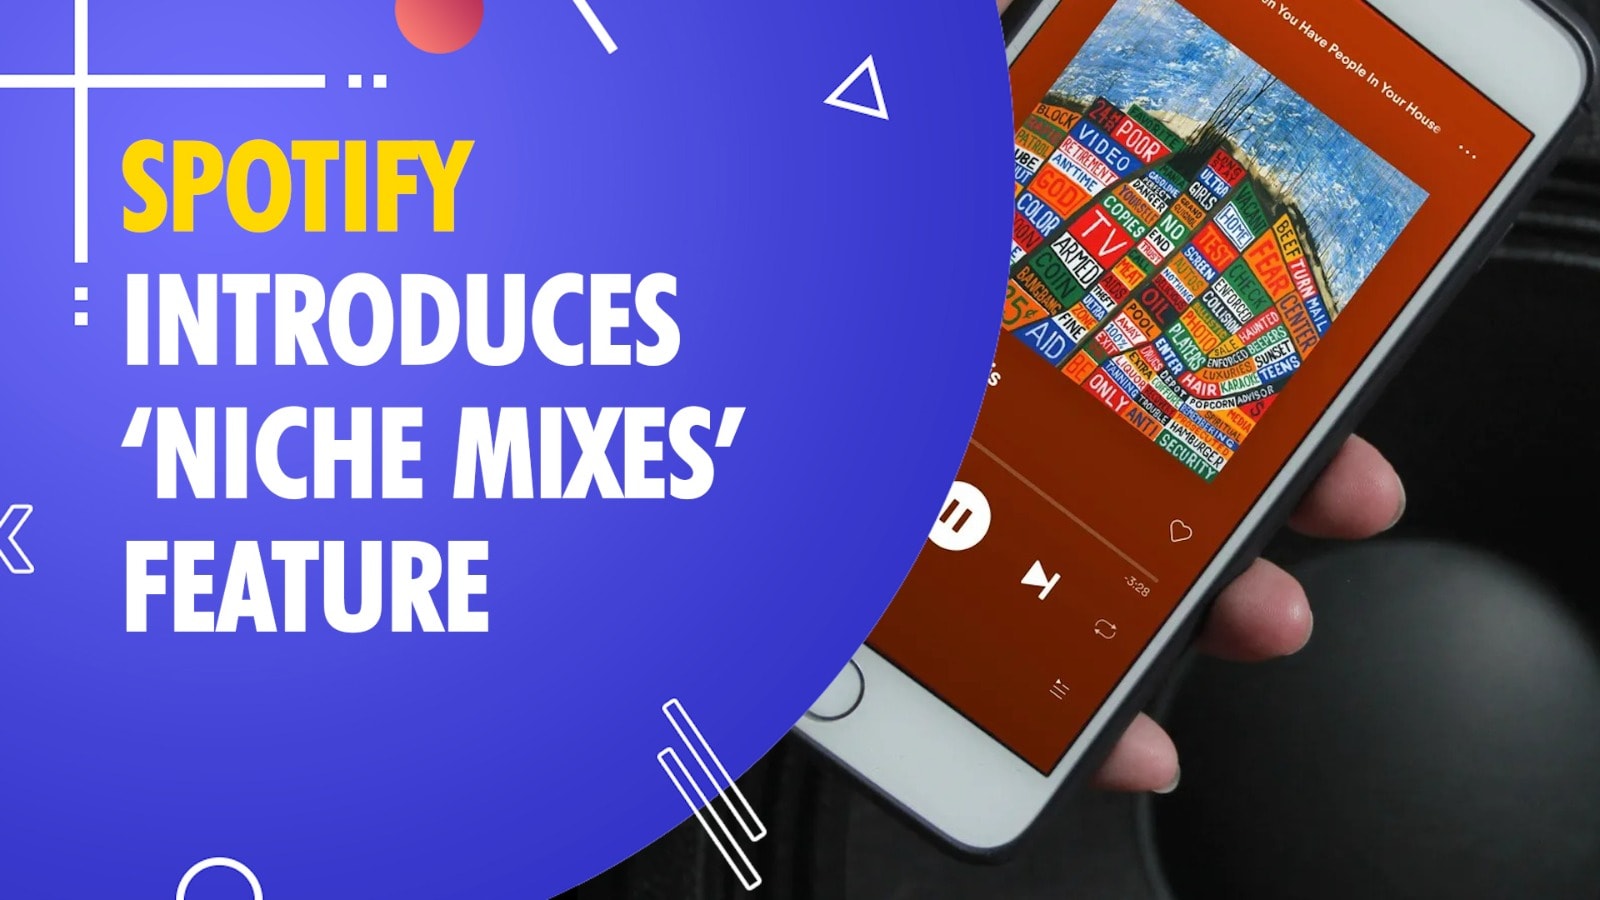 What is the new feature    Niche Mixes    in Spotify ?